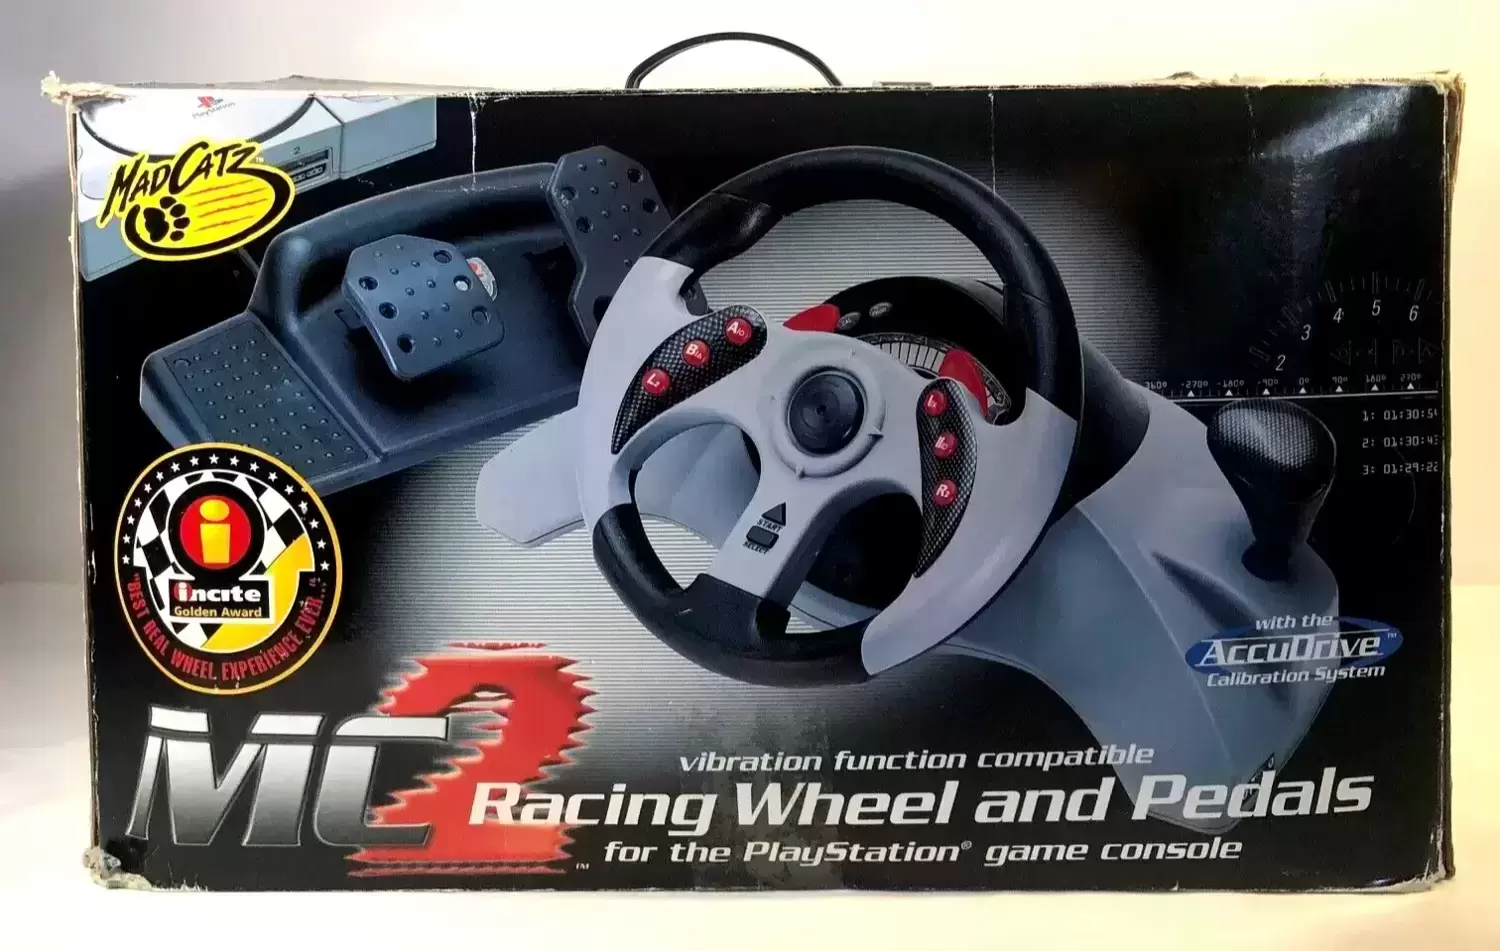 How To Calibrate MC2 Racing Wheel For PlayStation 2